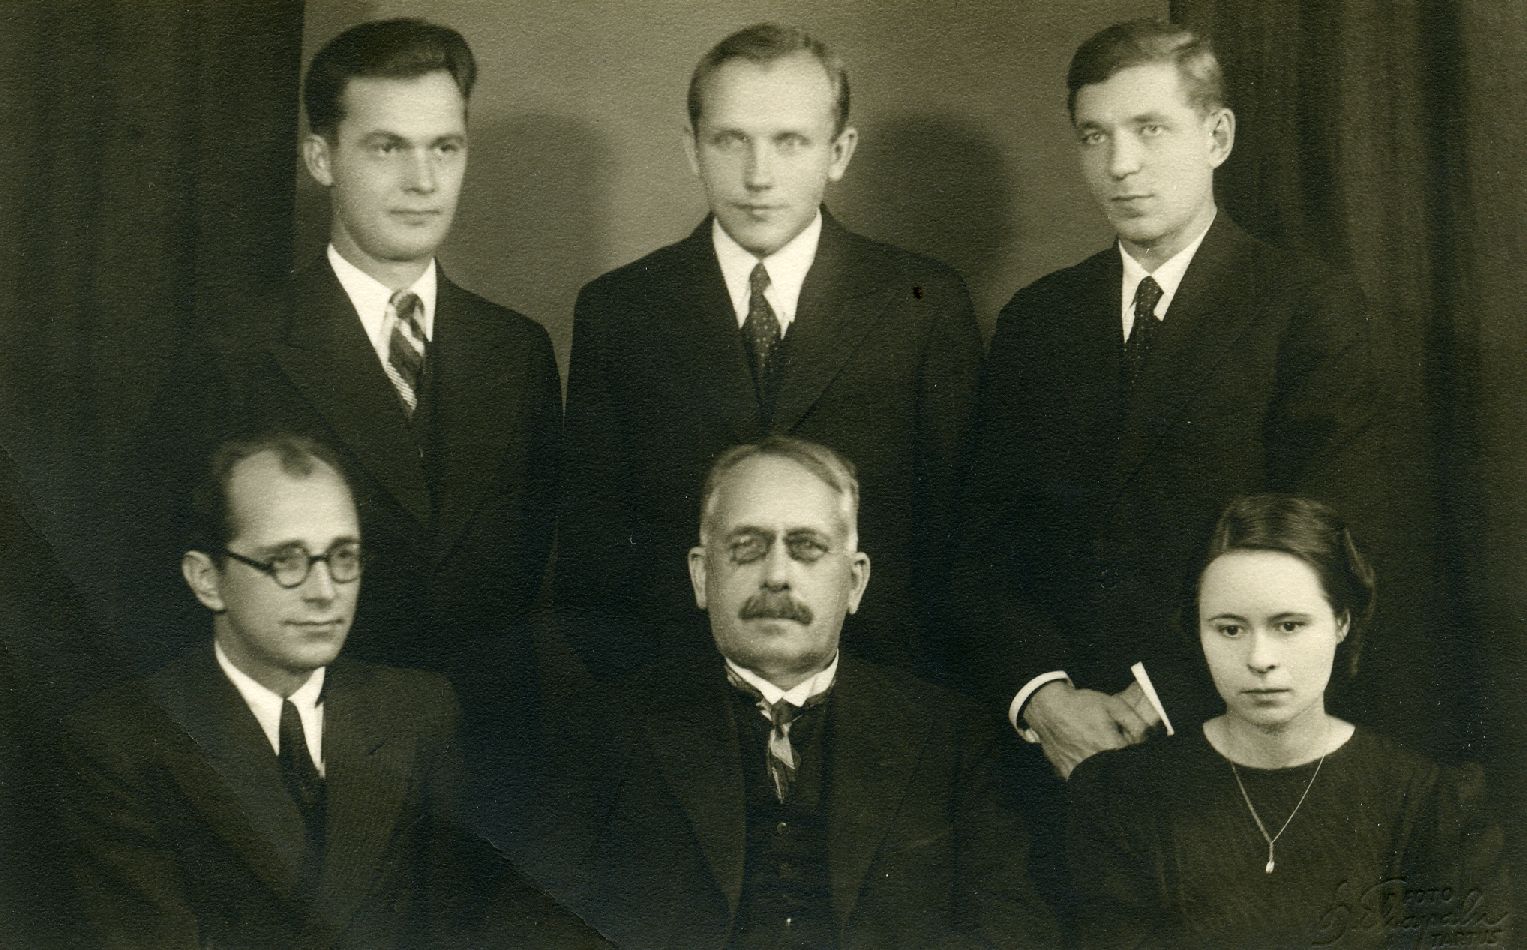 Management of the academic Literature Society in 1938